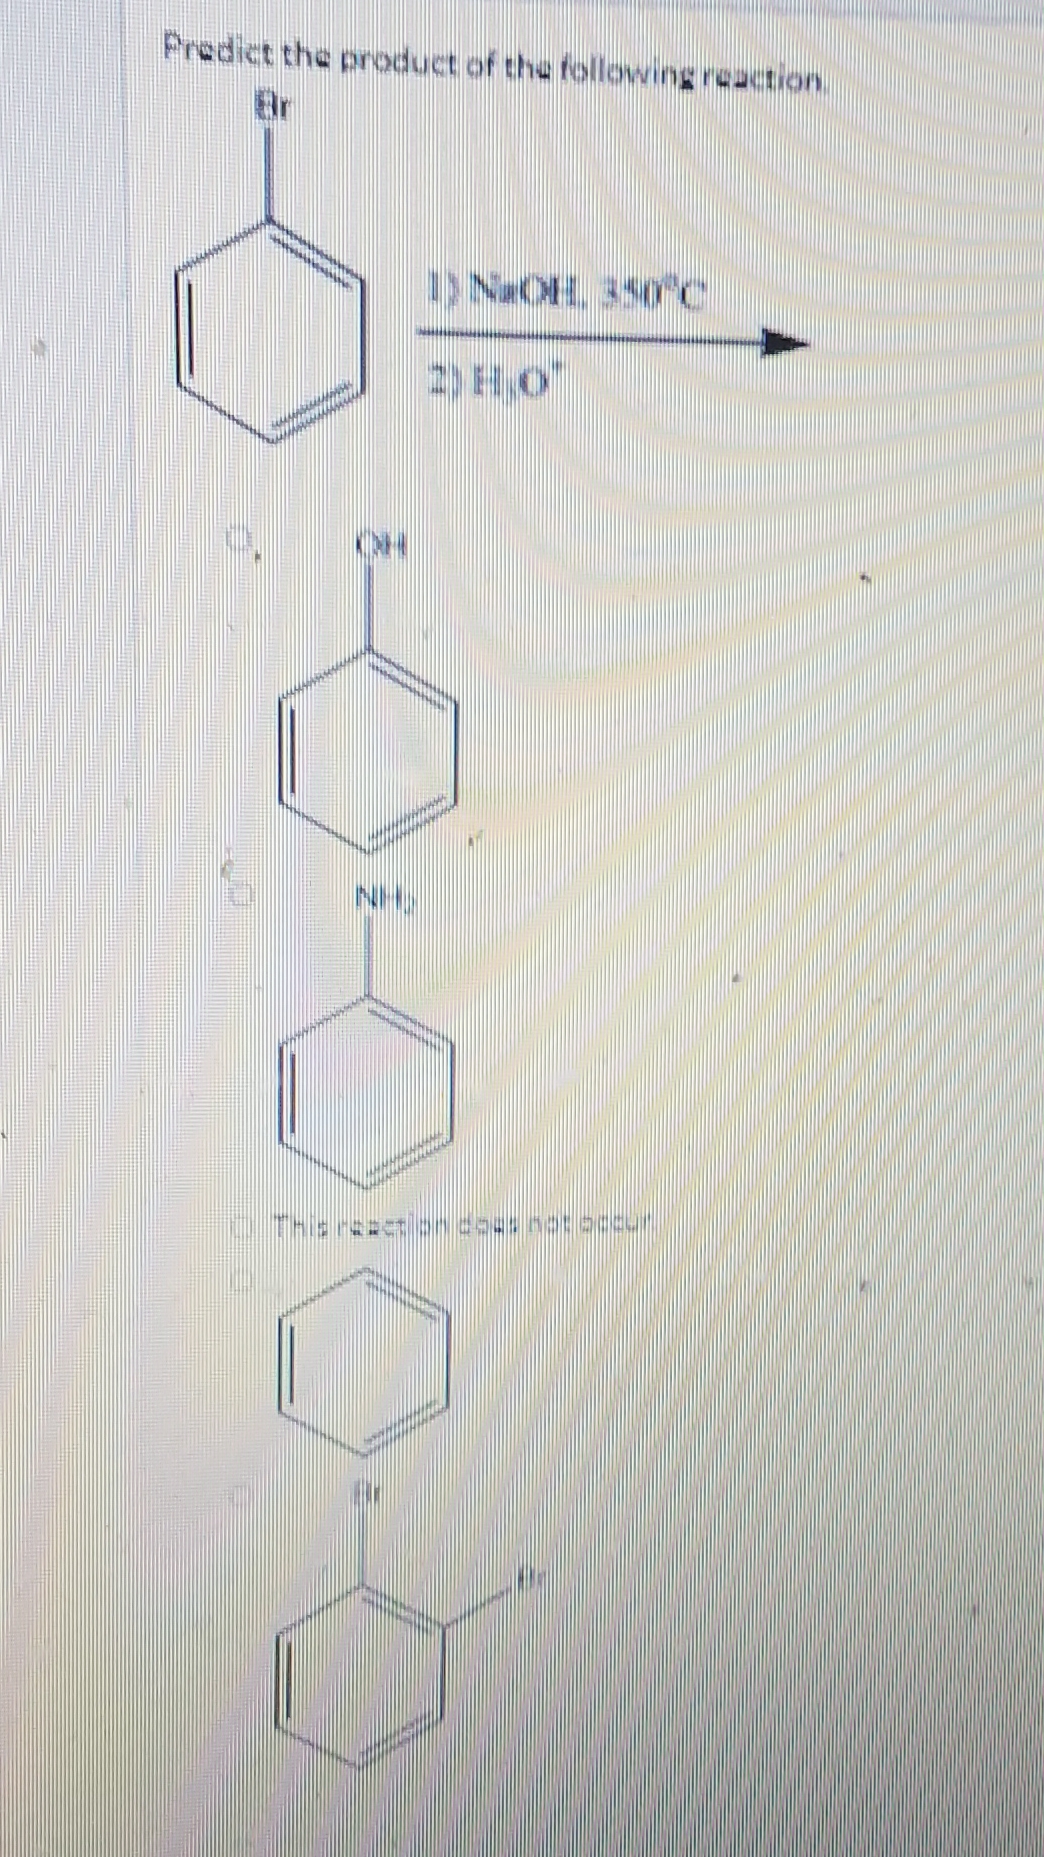 Predict the product of the following reaction.
Br
)NaOH 350 c
NH
CThis reacten does netaccur
